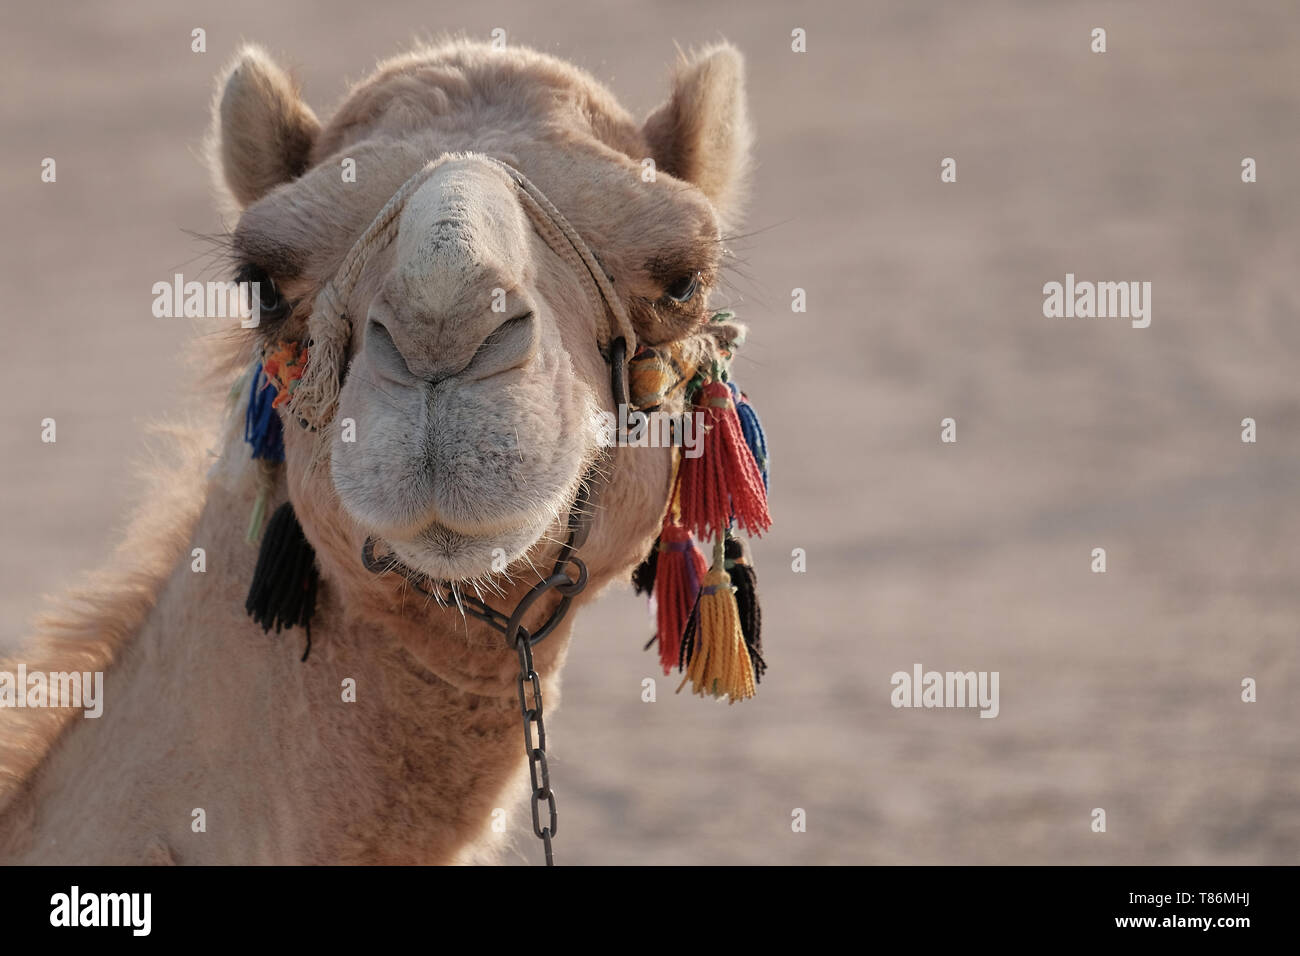 close up of a camel making funny faces Stock Photo